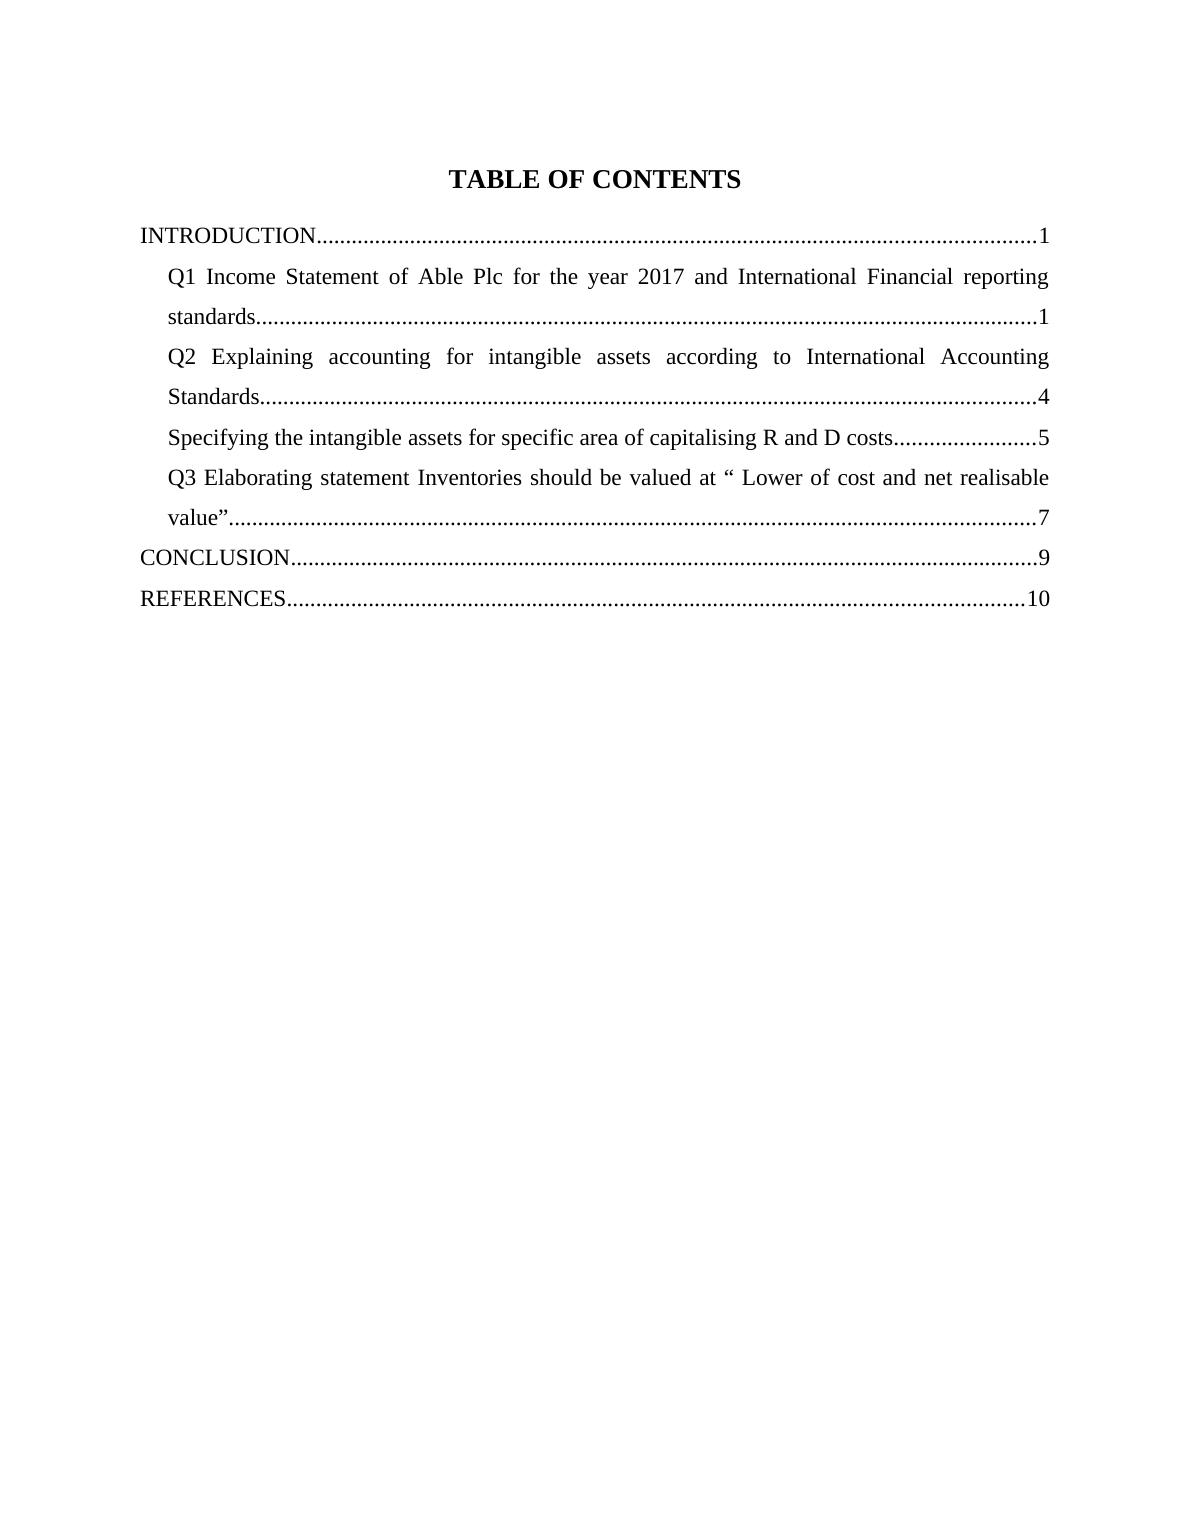 Report on Preparation of Financial Statement_2